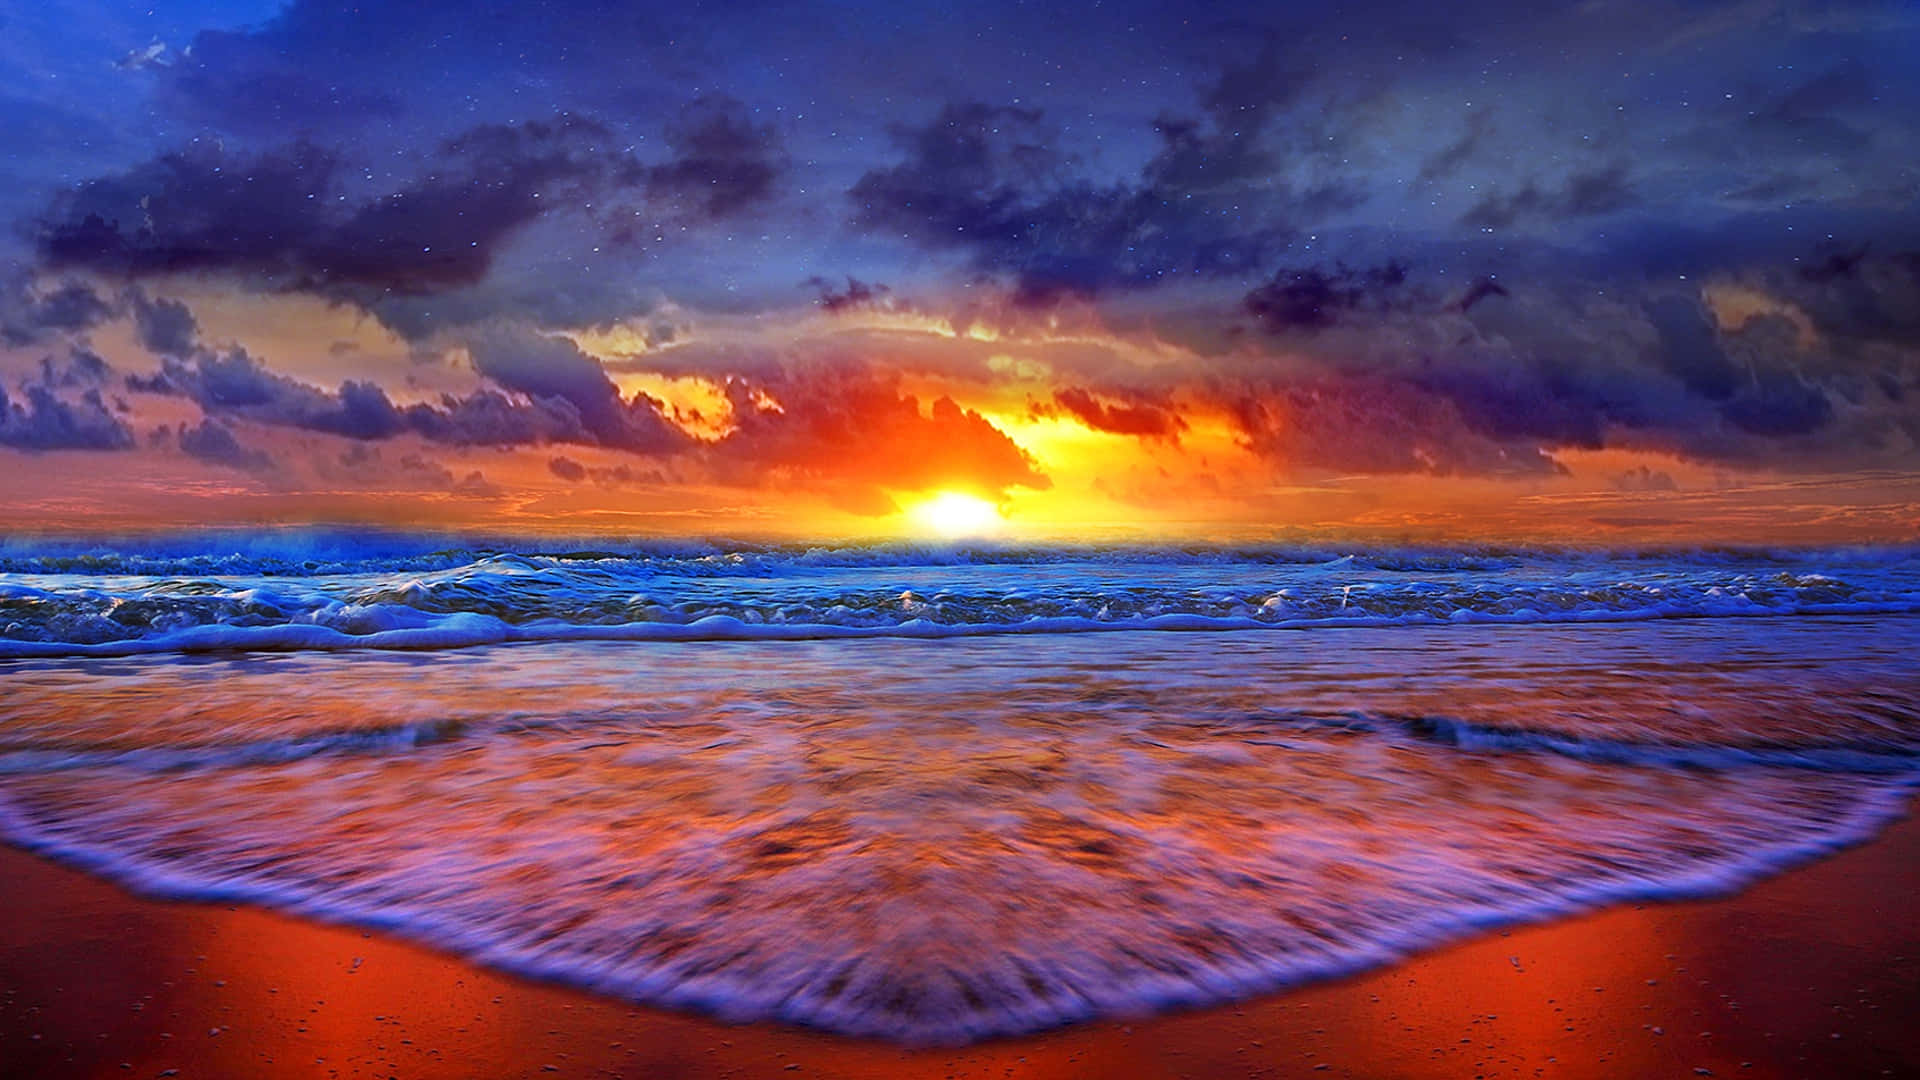 Enjoy the tranquility of a sunset at the beach.